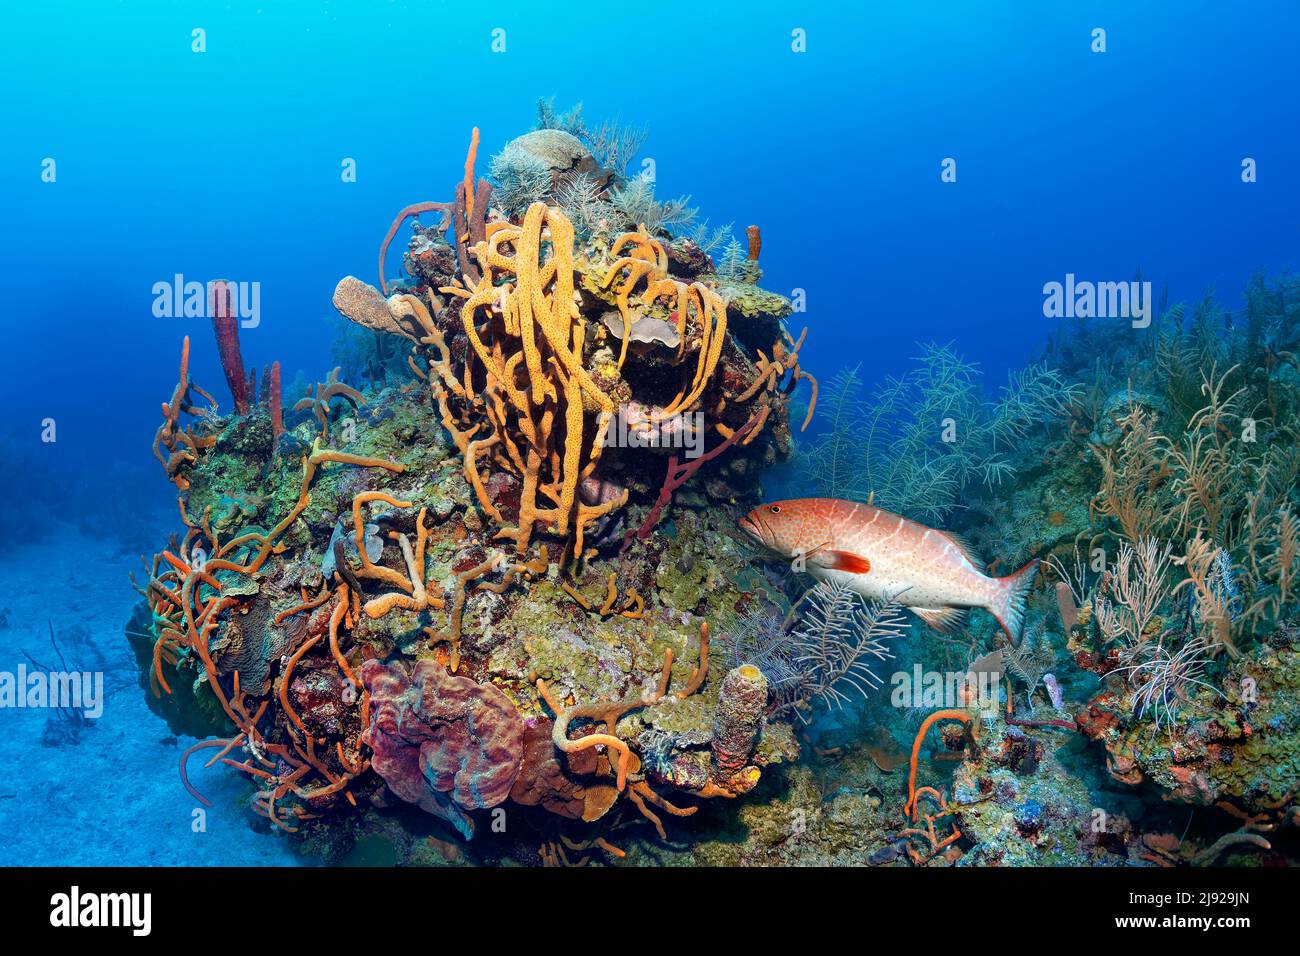 Typical Caribbean coral (Octocorallia) reef, tiger grouper (Myteoperca tigris), large coral block with various sponge (Porifera) and stony coral Stock Photo